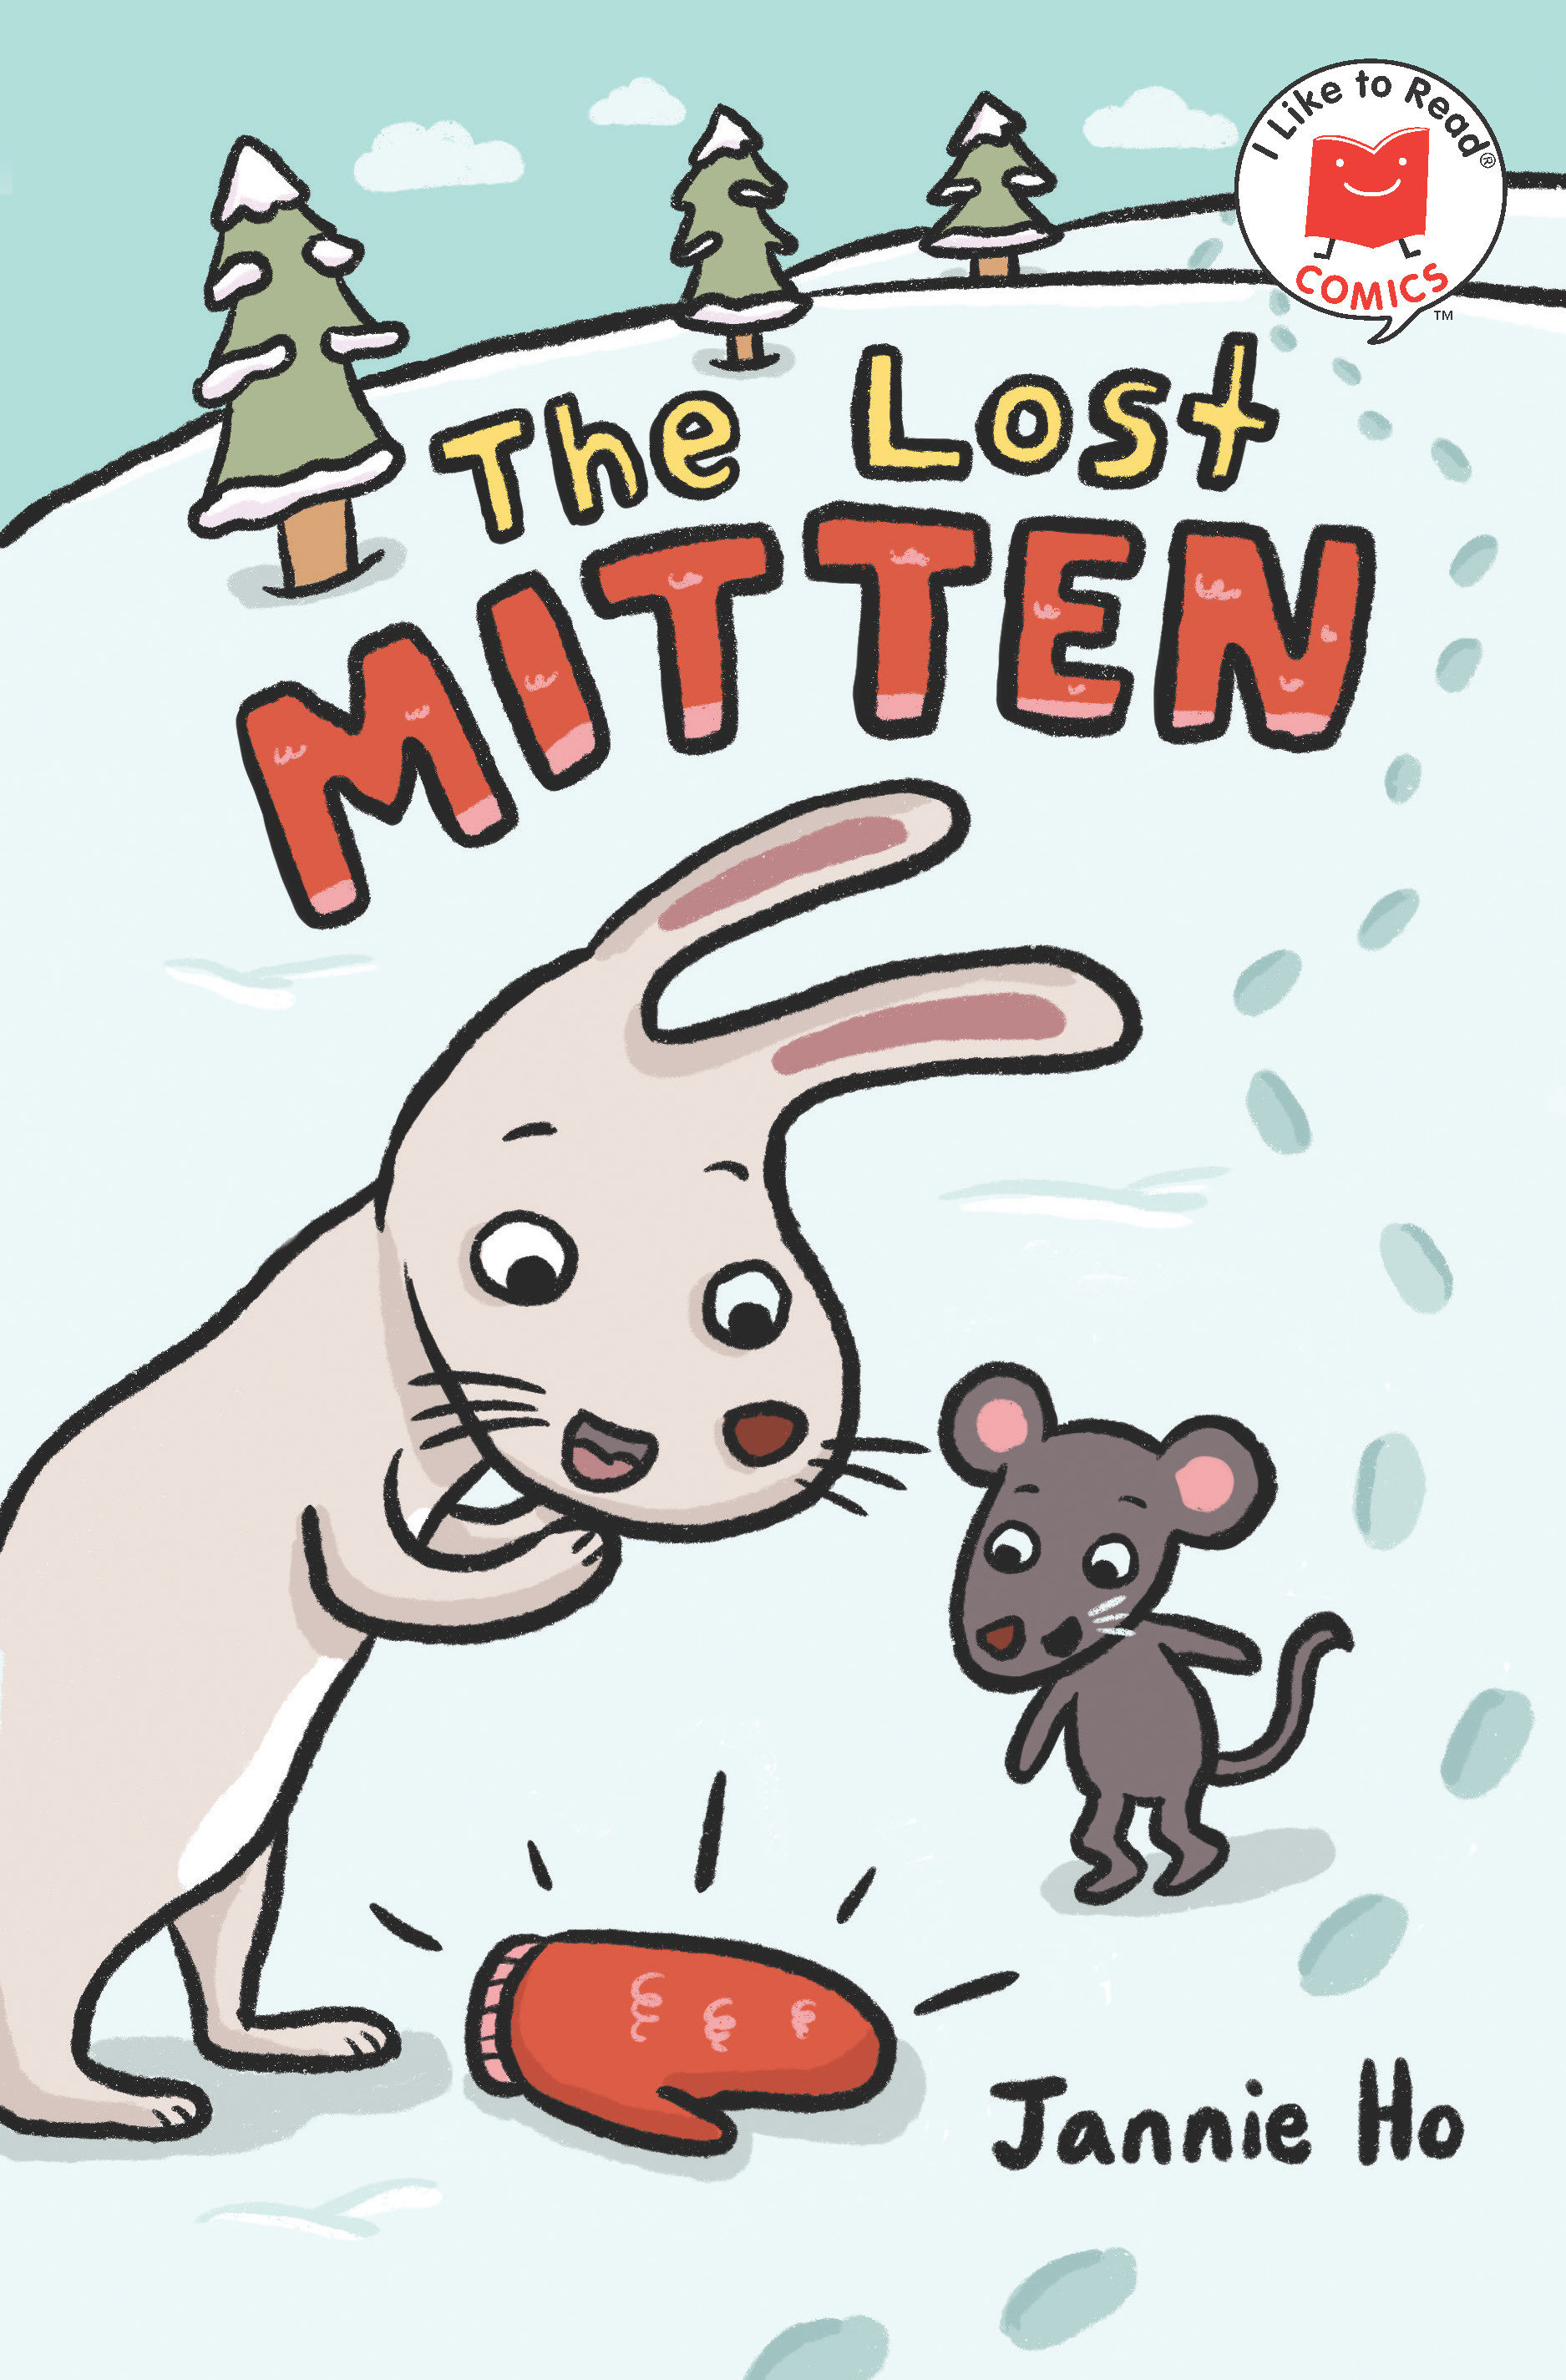 I Like To Read Comics Hardcover Graphic Novel Volume 8 The Lost Mitten